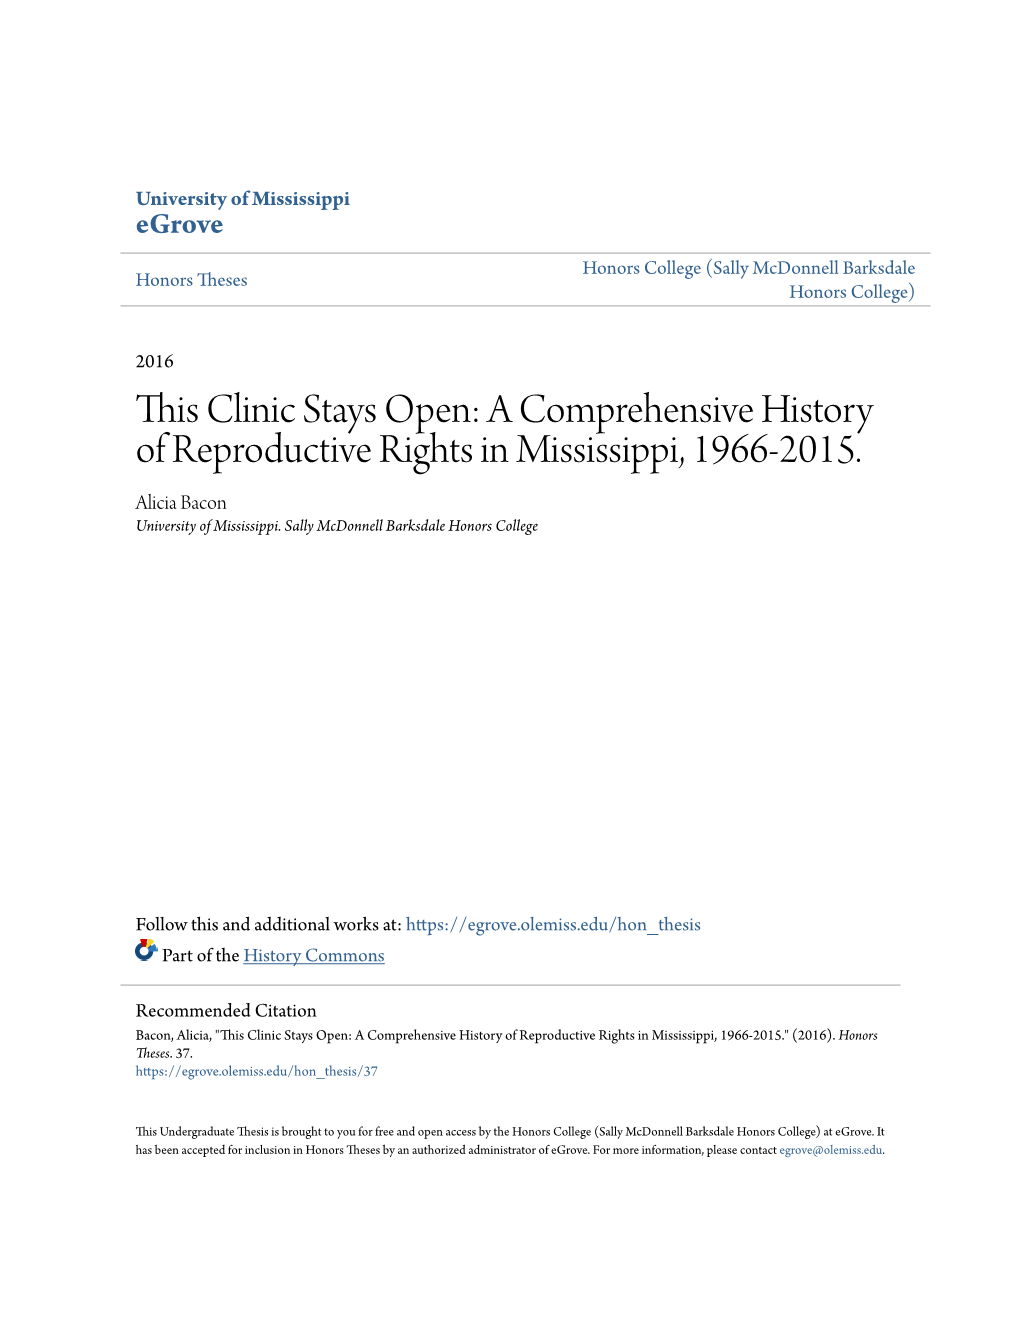 This Clinic Stays Open: a Comprehensive History of Reproductive Rights in Mississippi, 1966-2015